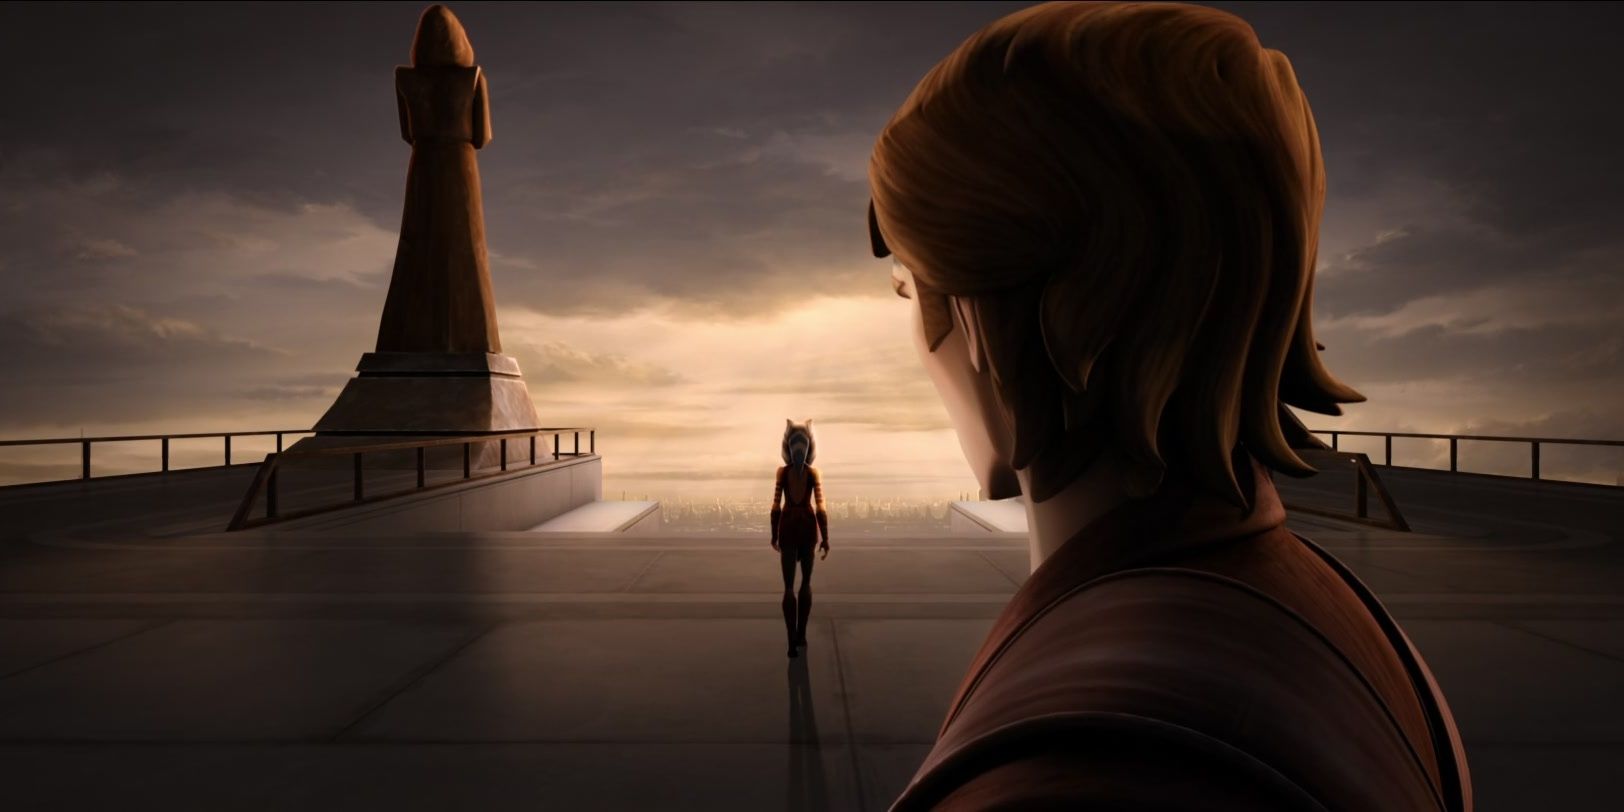 Ahsoka Tano, with her back to Anakin, leaves the Jedi Order facing the sun.